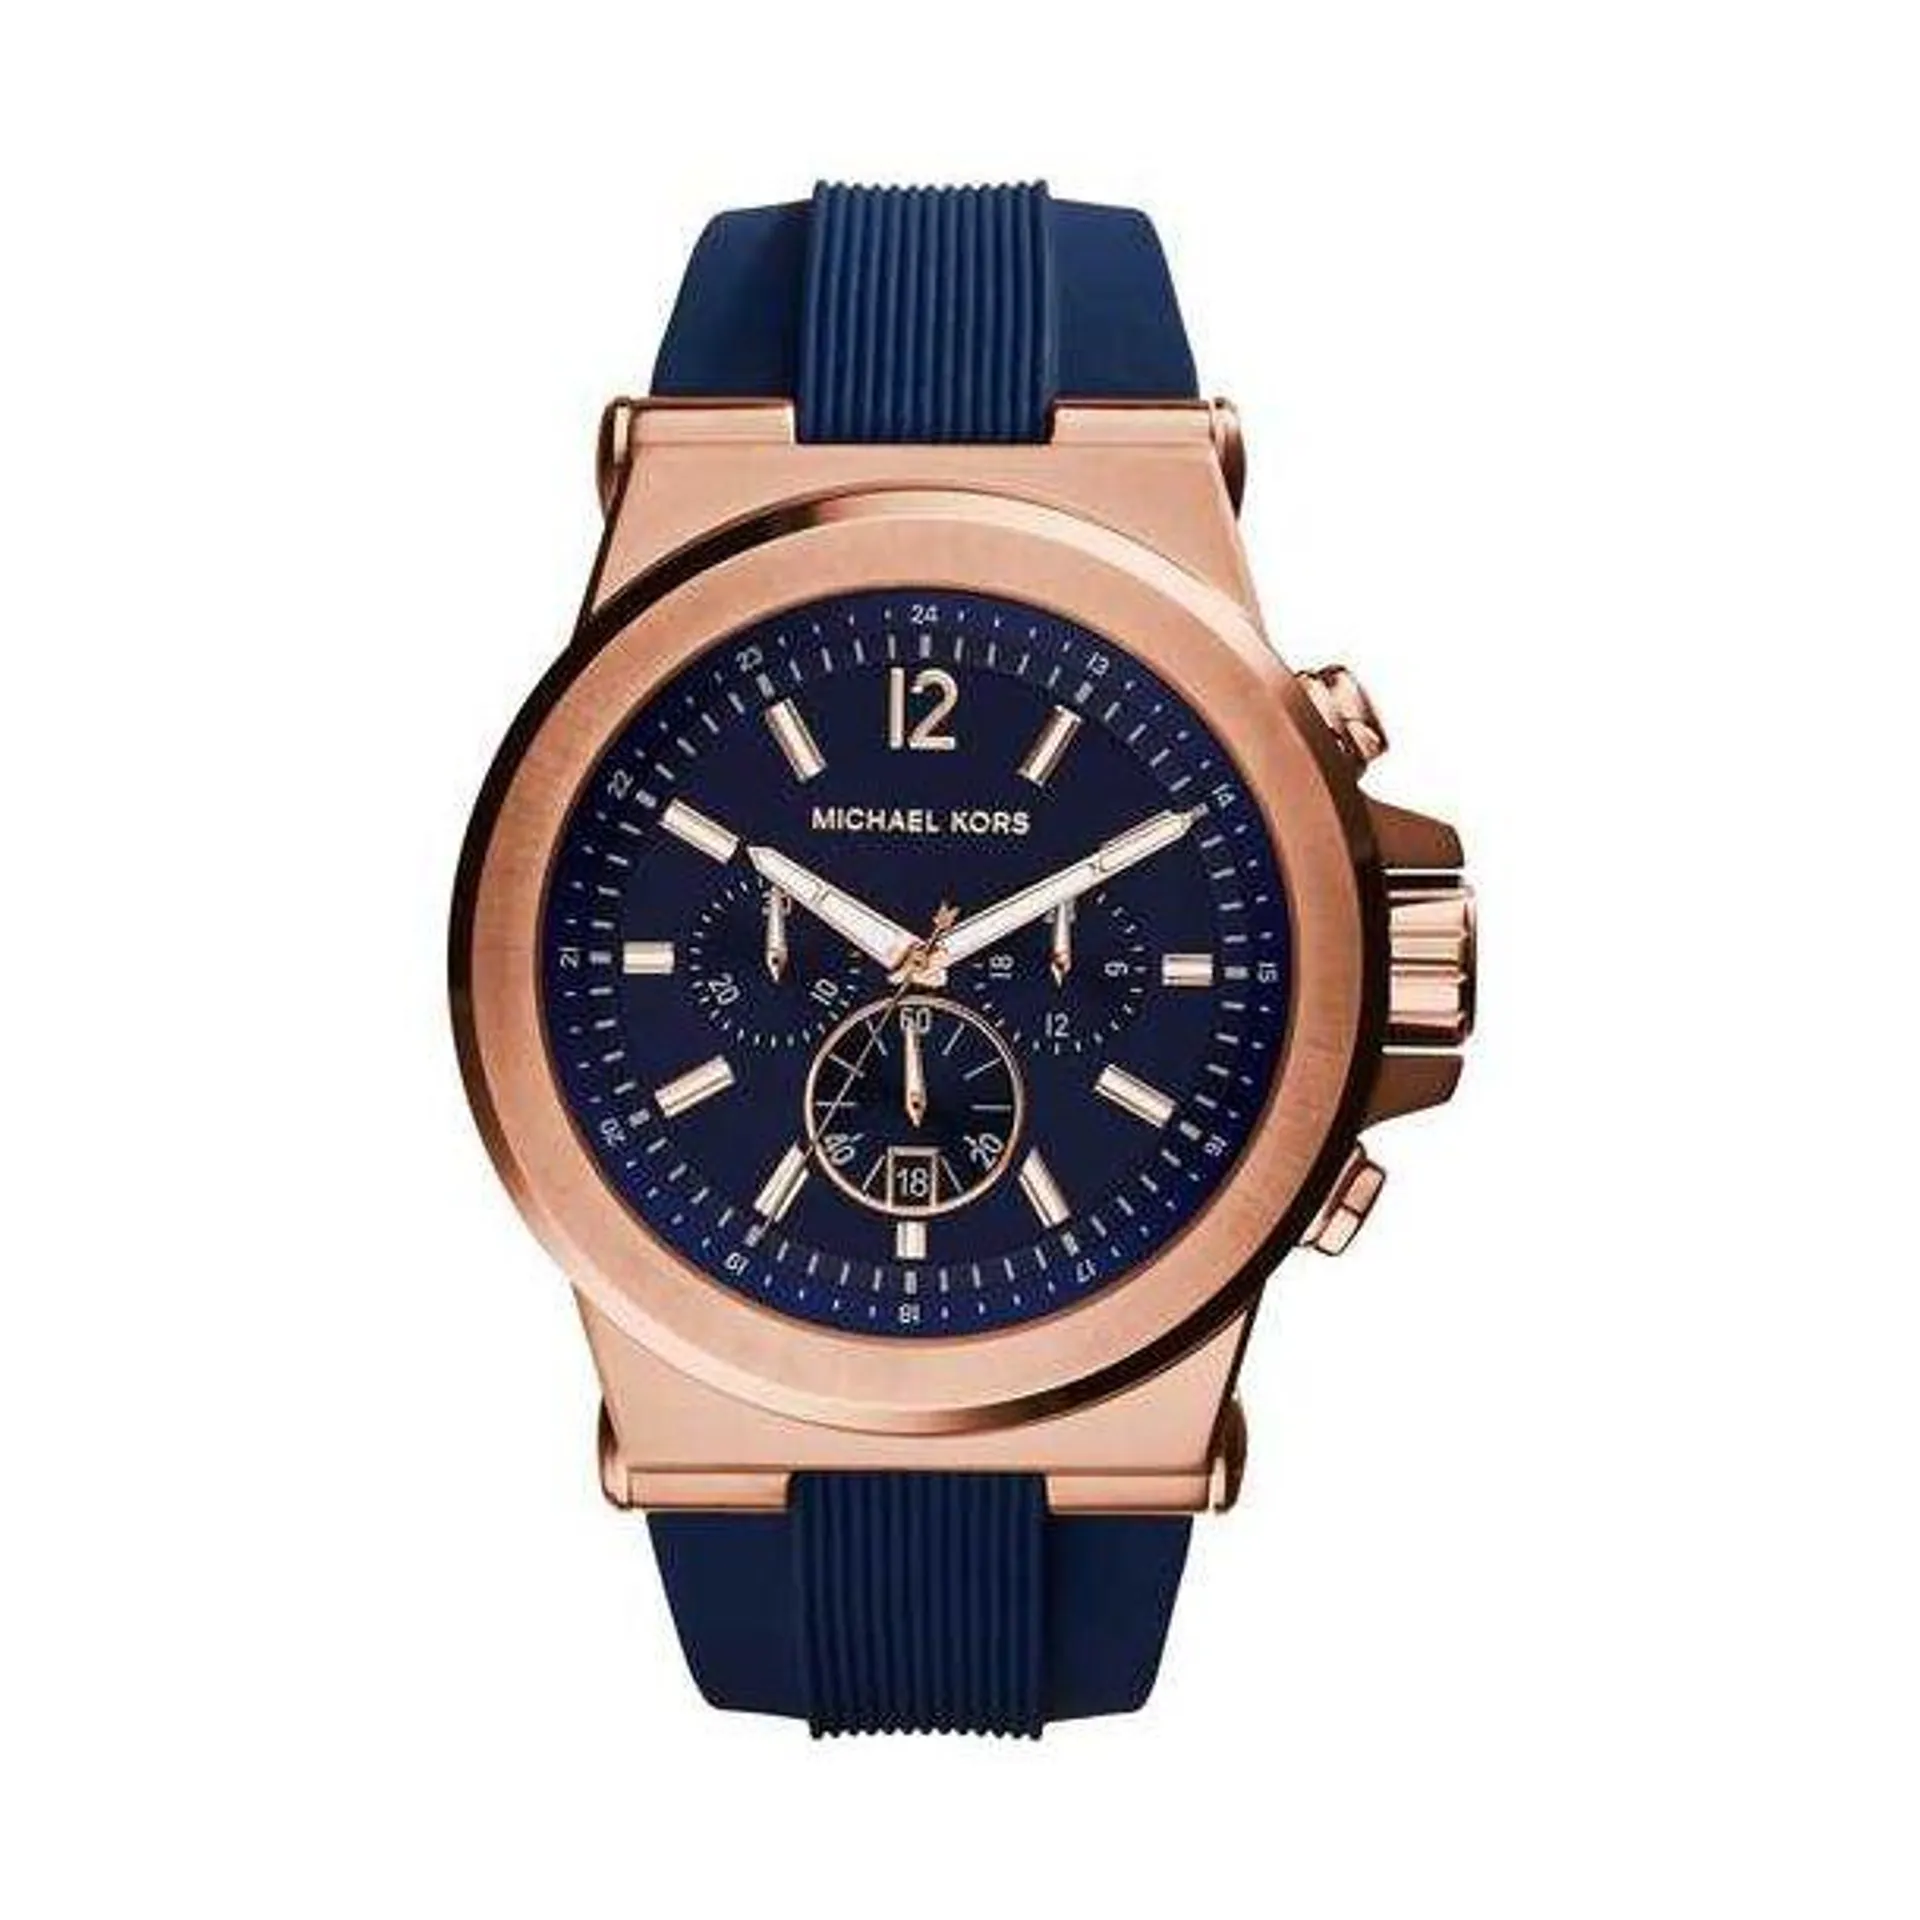 Michael Kors Men's Dylan Round Navy Dial Chronograph Silicone Strap Watch - Navy